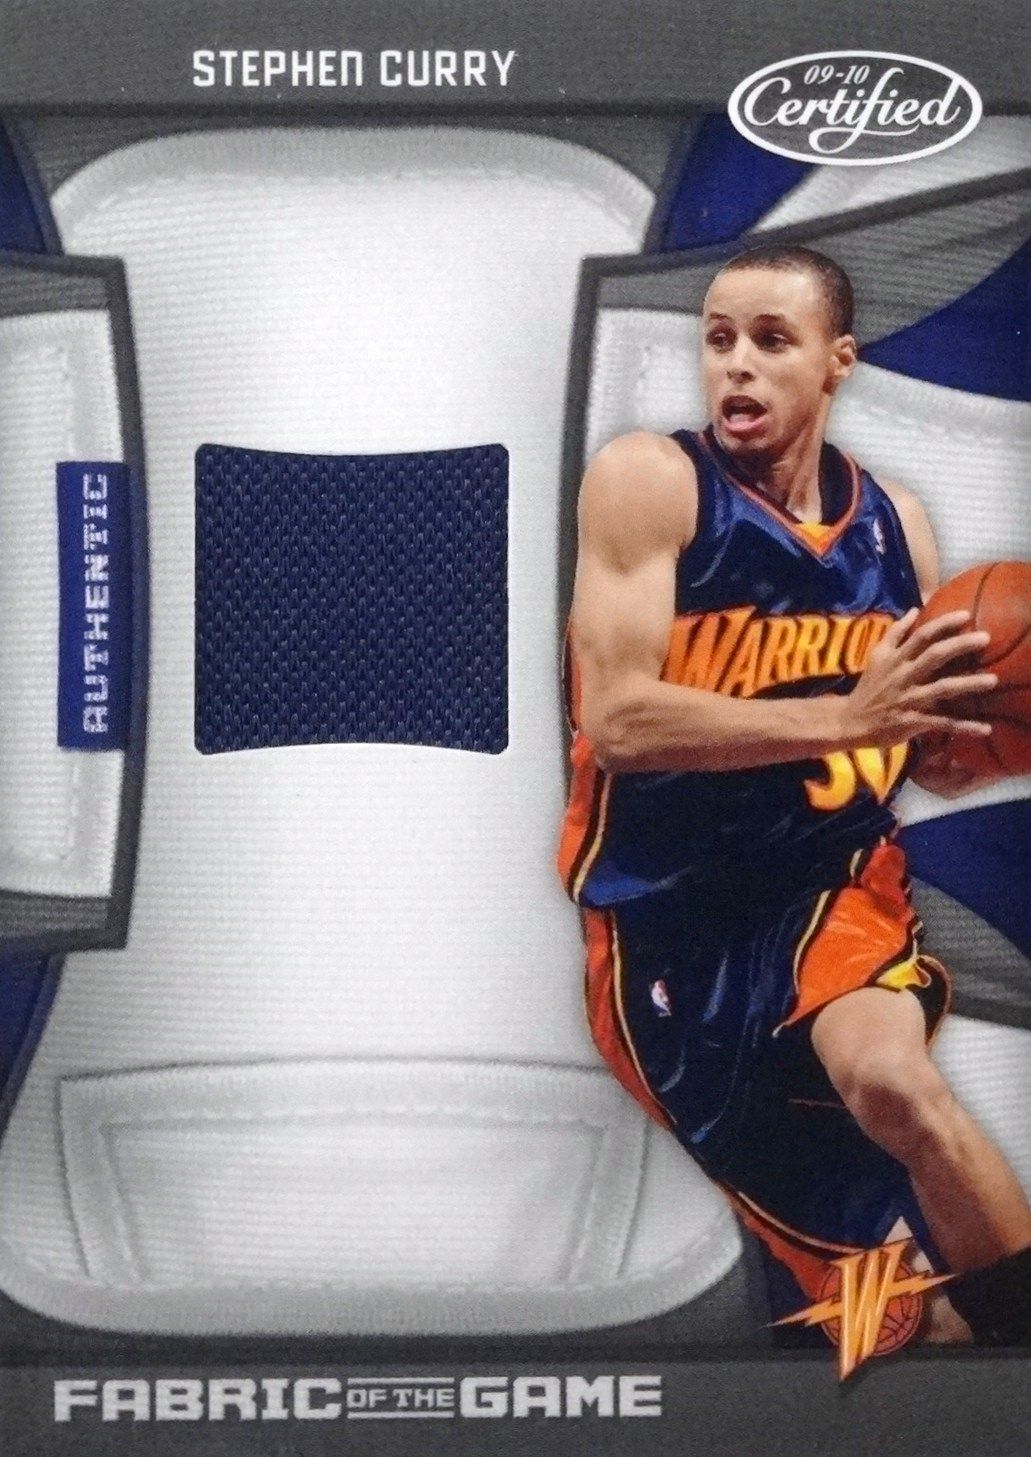 2009-10 Certified Fabric of the Game #FOG-SC Stephen Curry 250 - Front.JPG